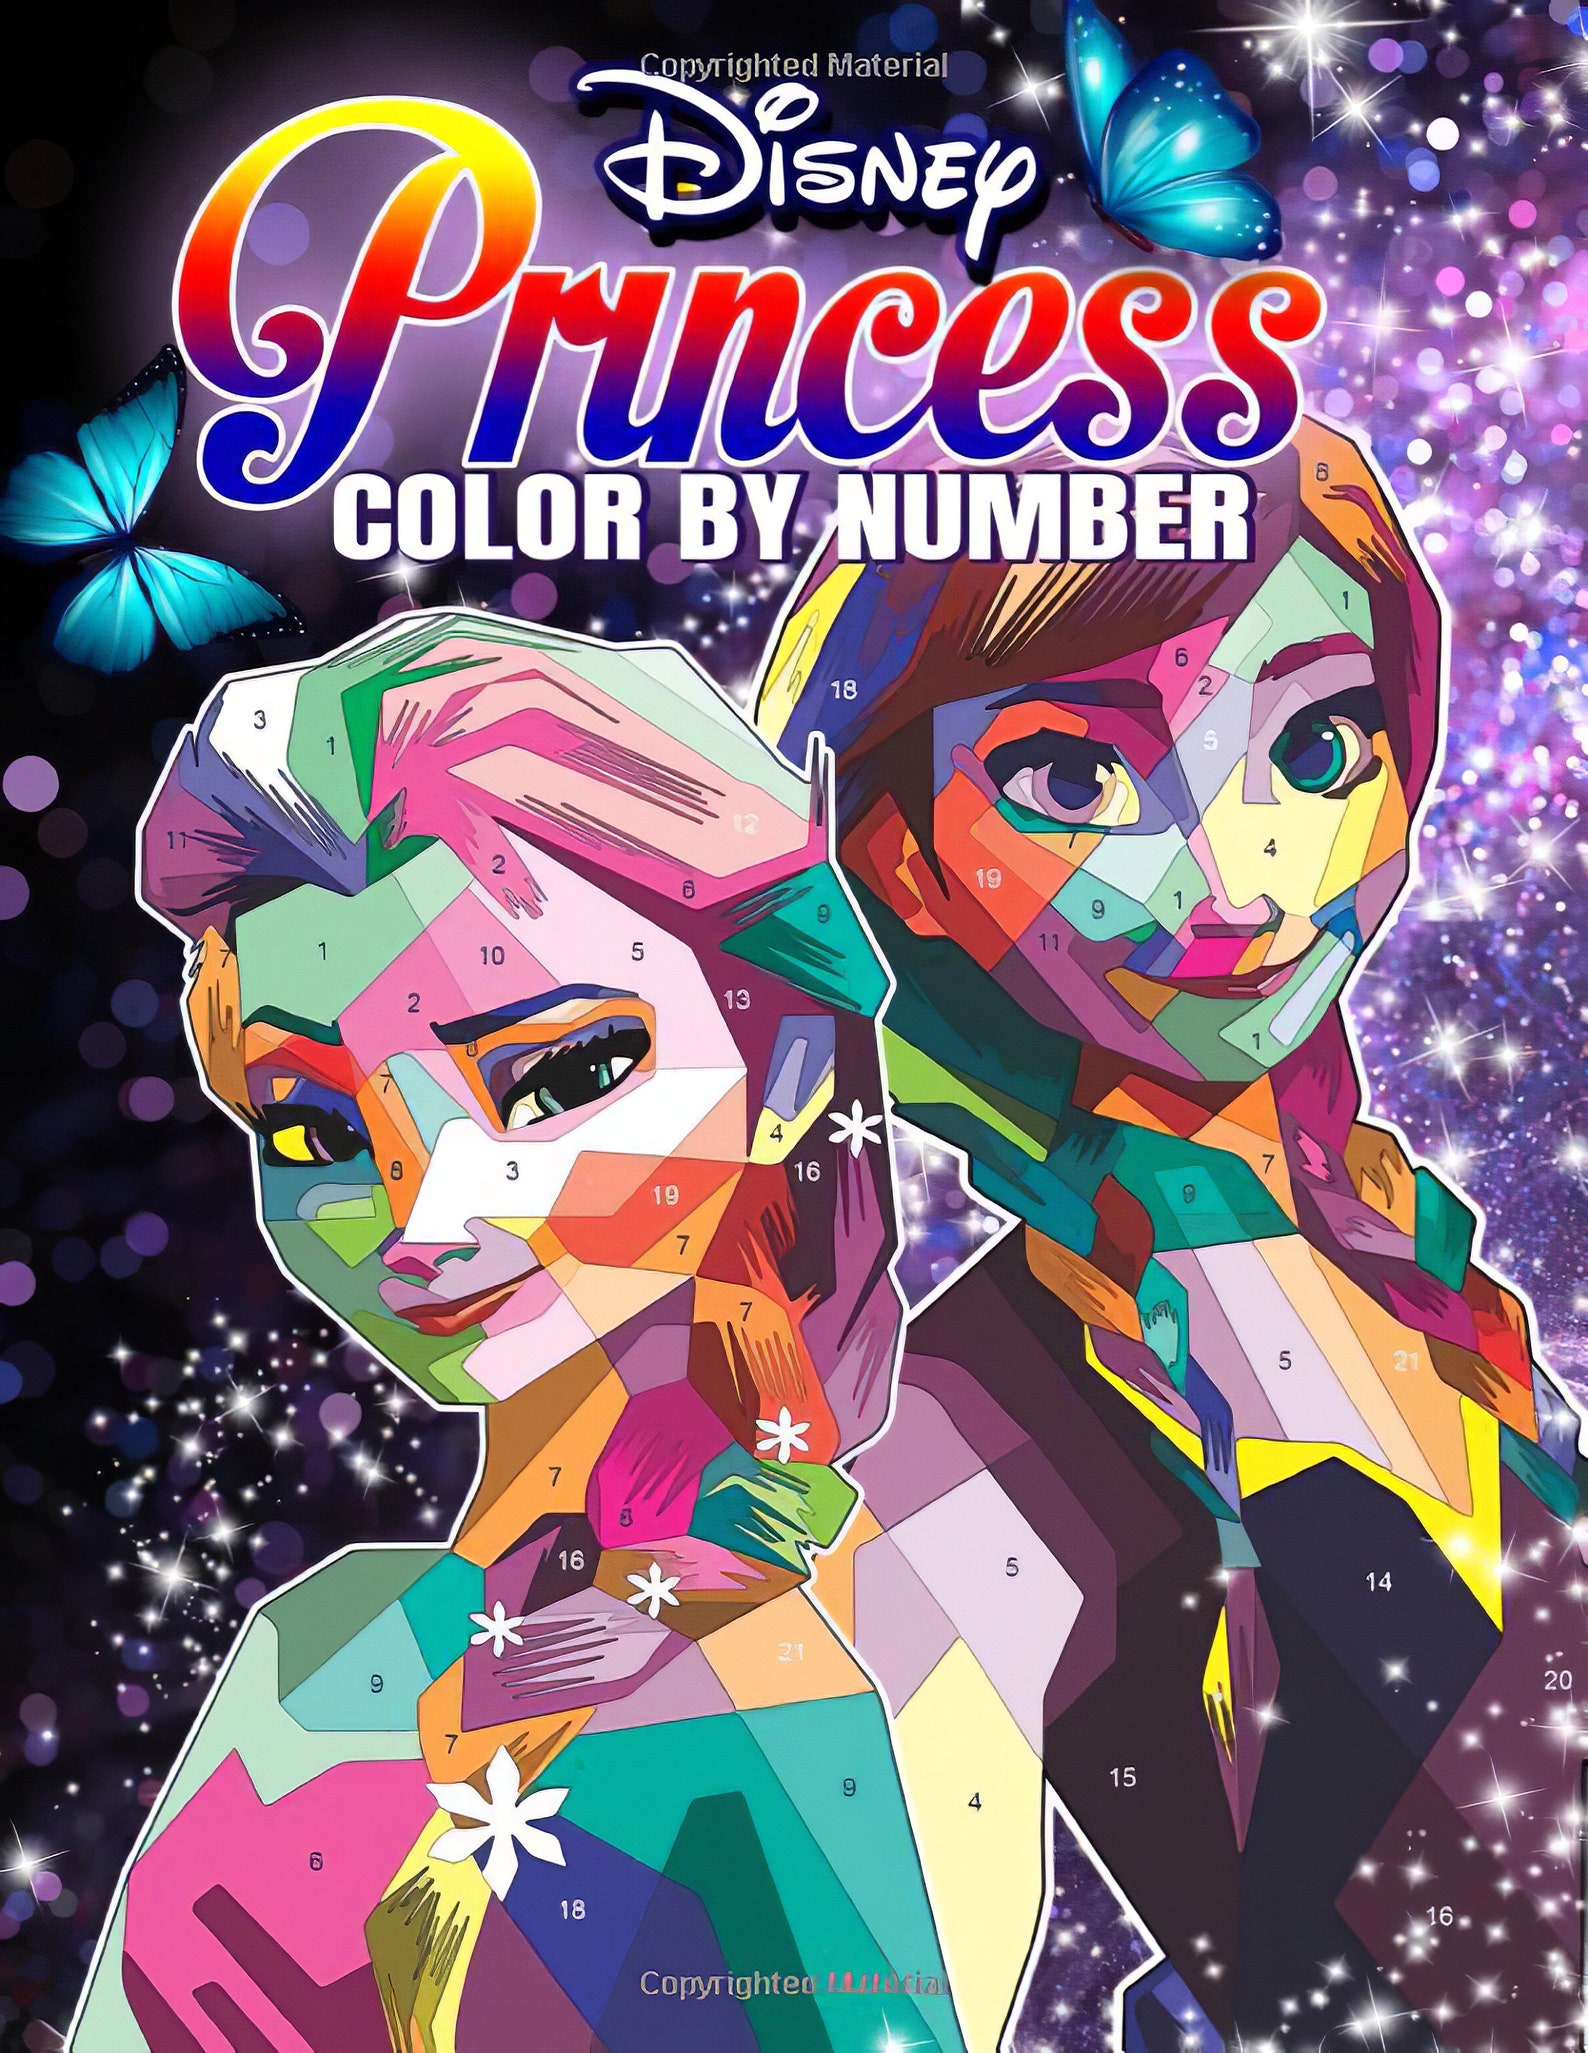 princess-color-by-number-great-coloring-book-for-adults-etsy